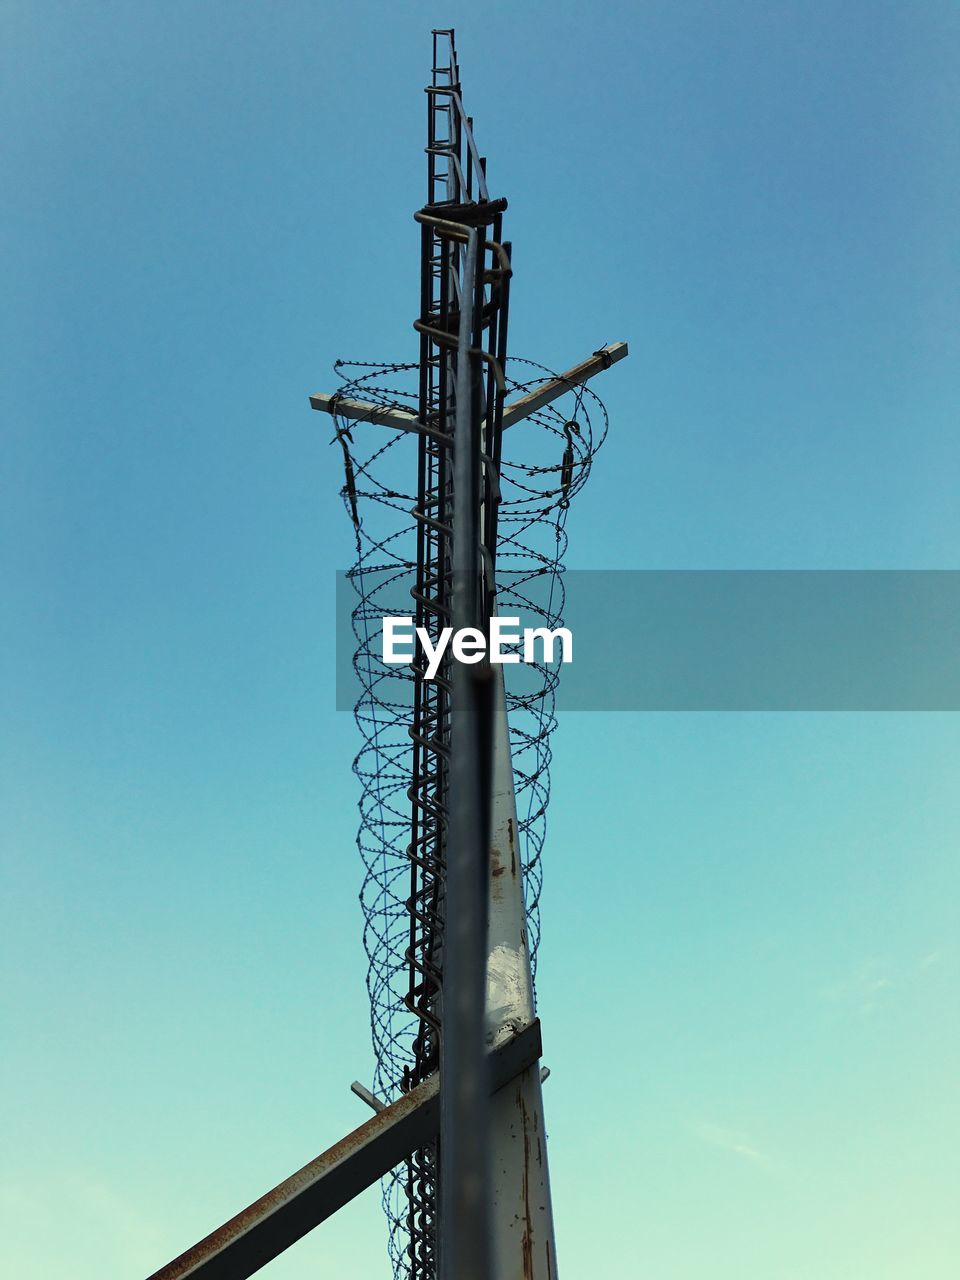 LOW ANGLE VIEW OF CRANE AGAINST CLEAR BLUE SKY